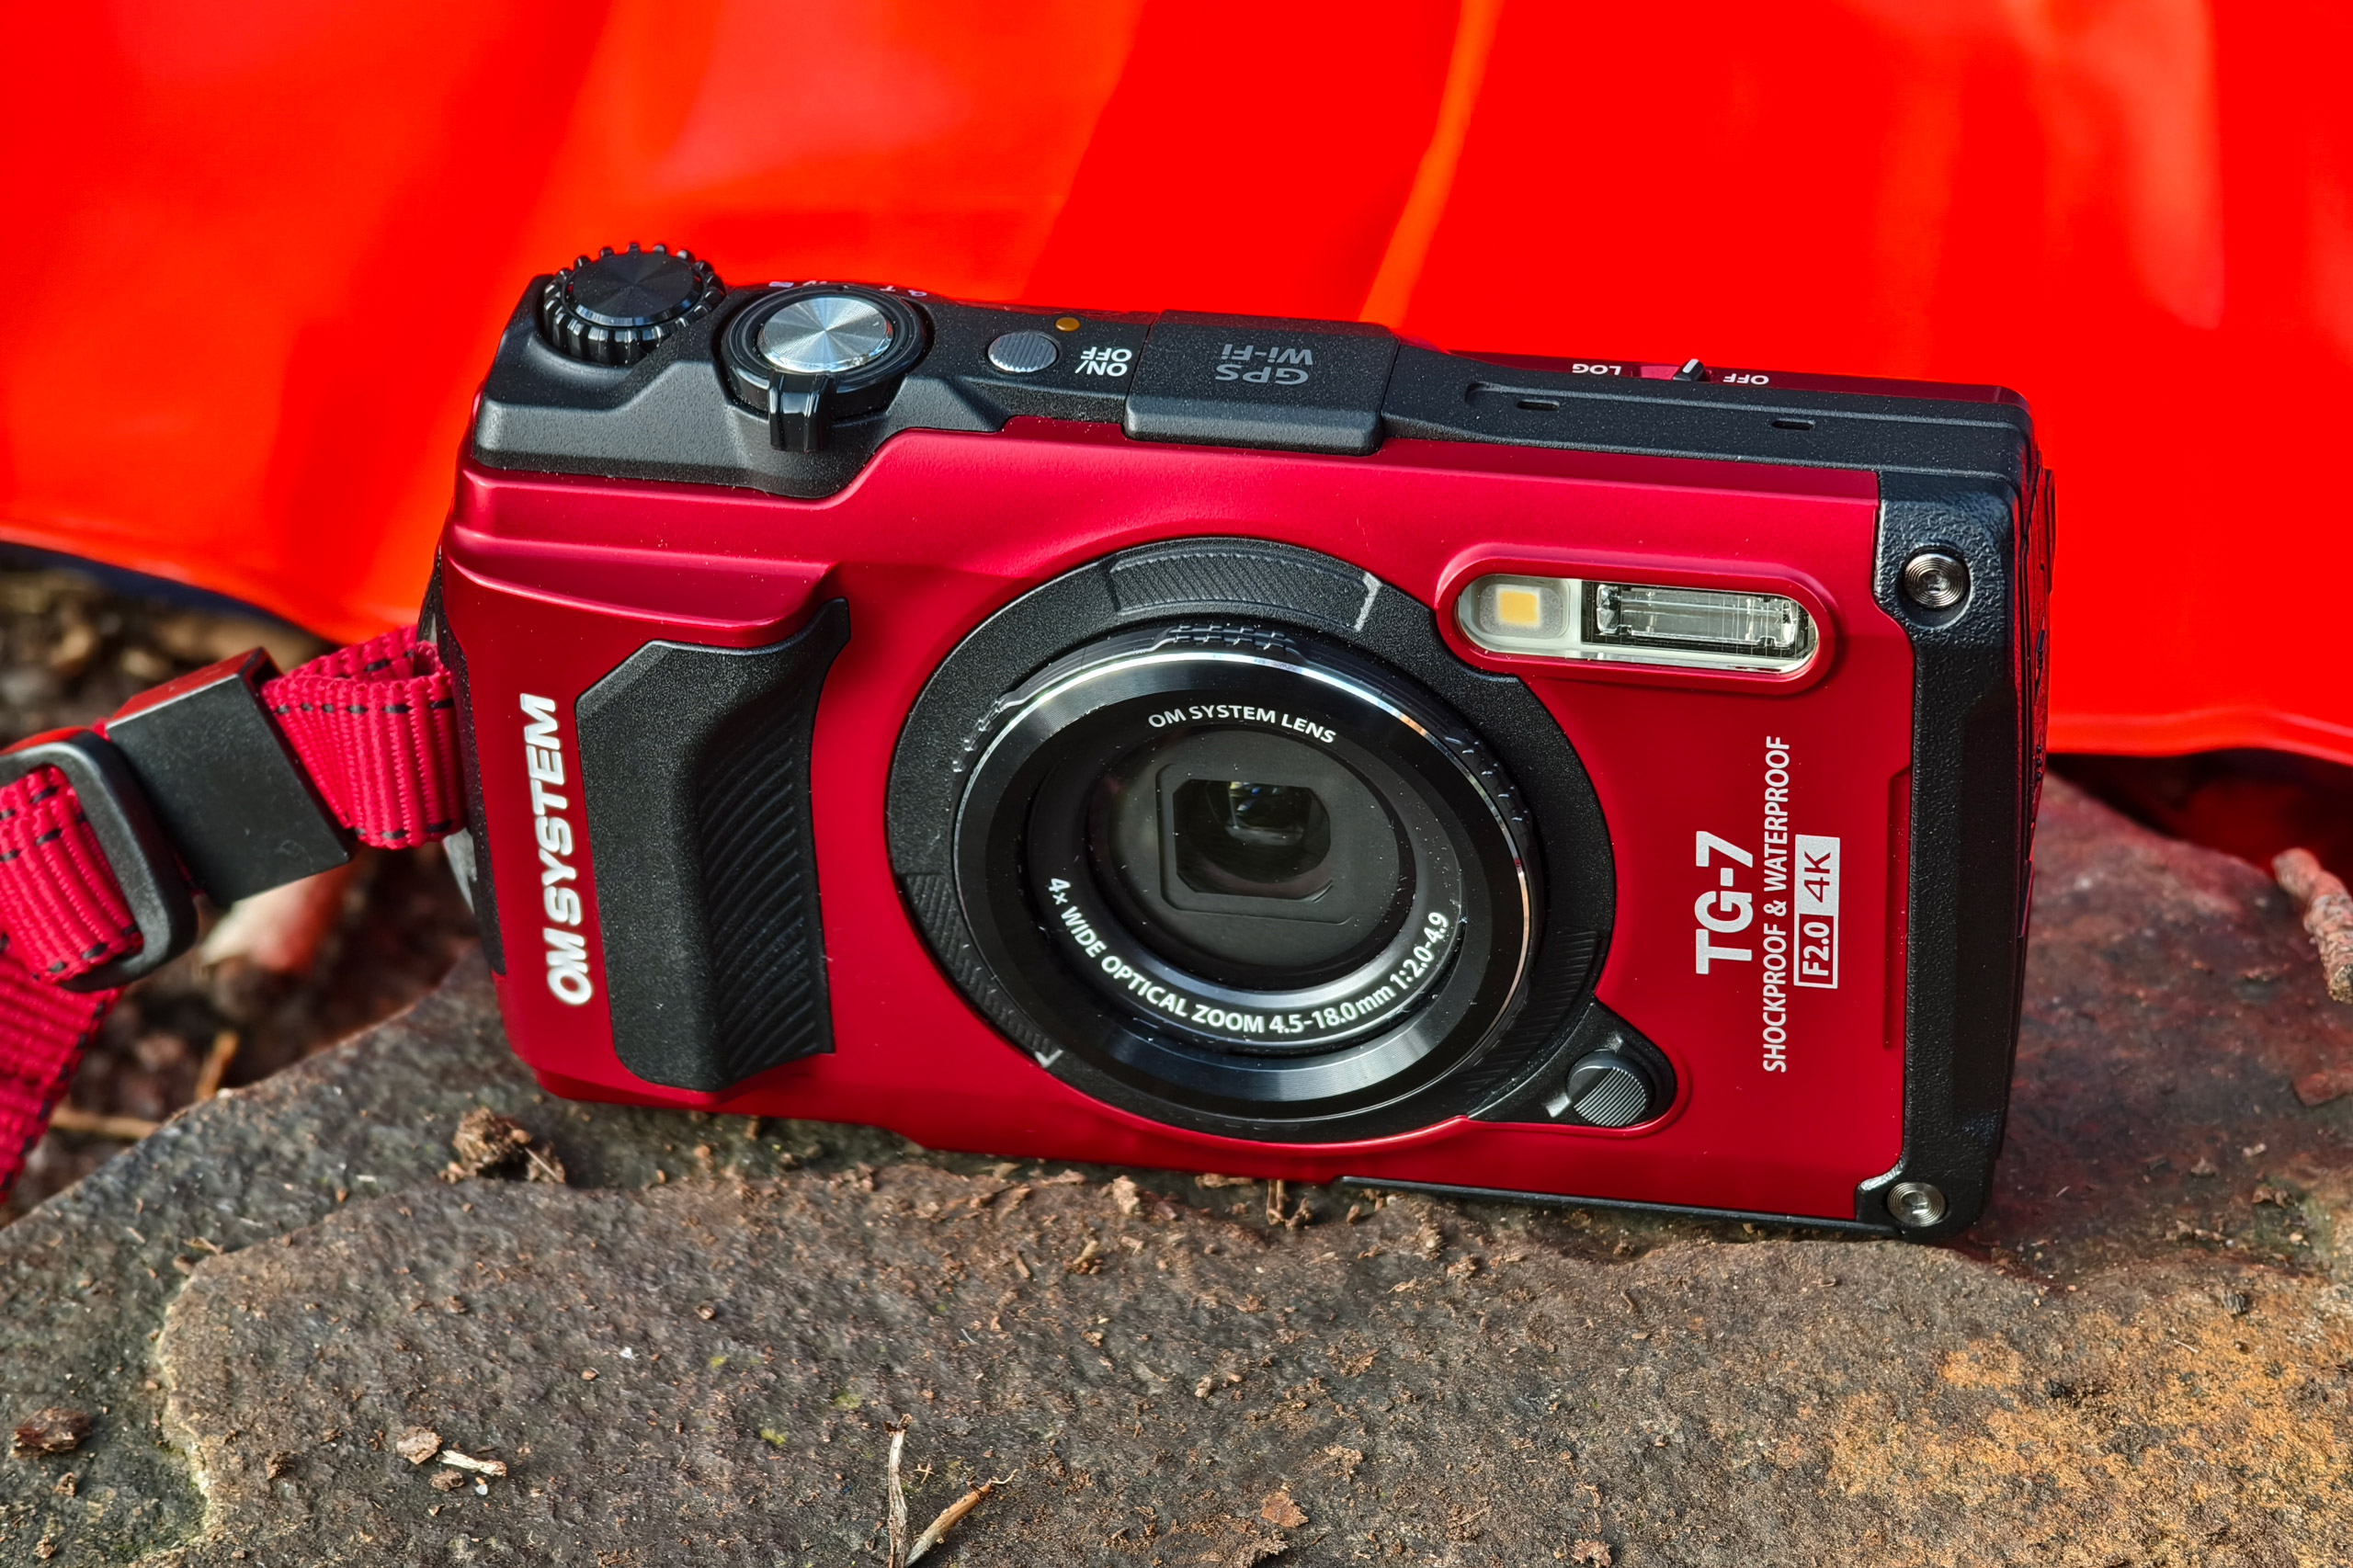 OM System Tough TG-7 in red. Photo Joshua Waller